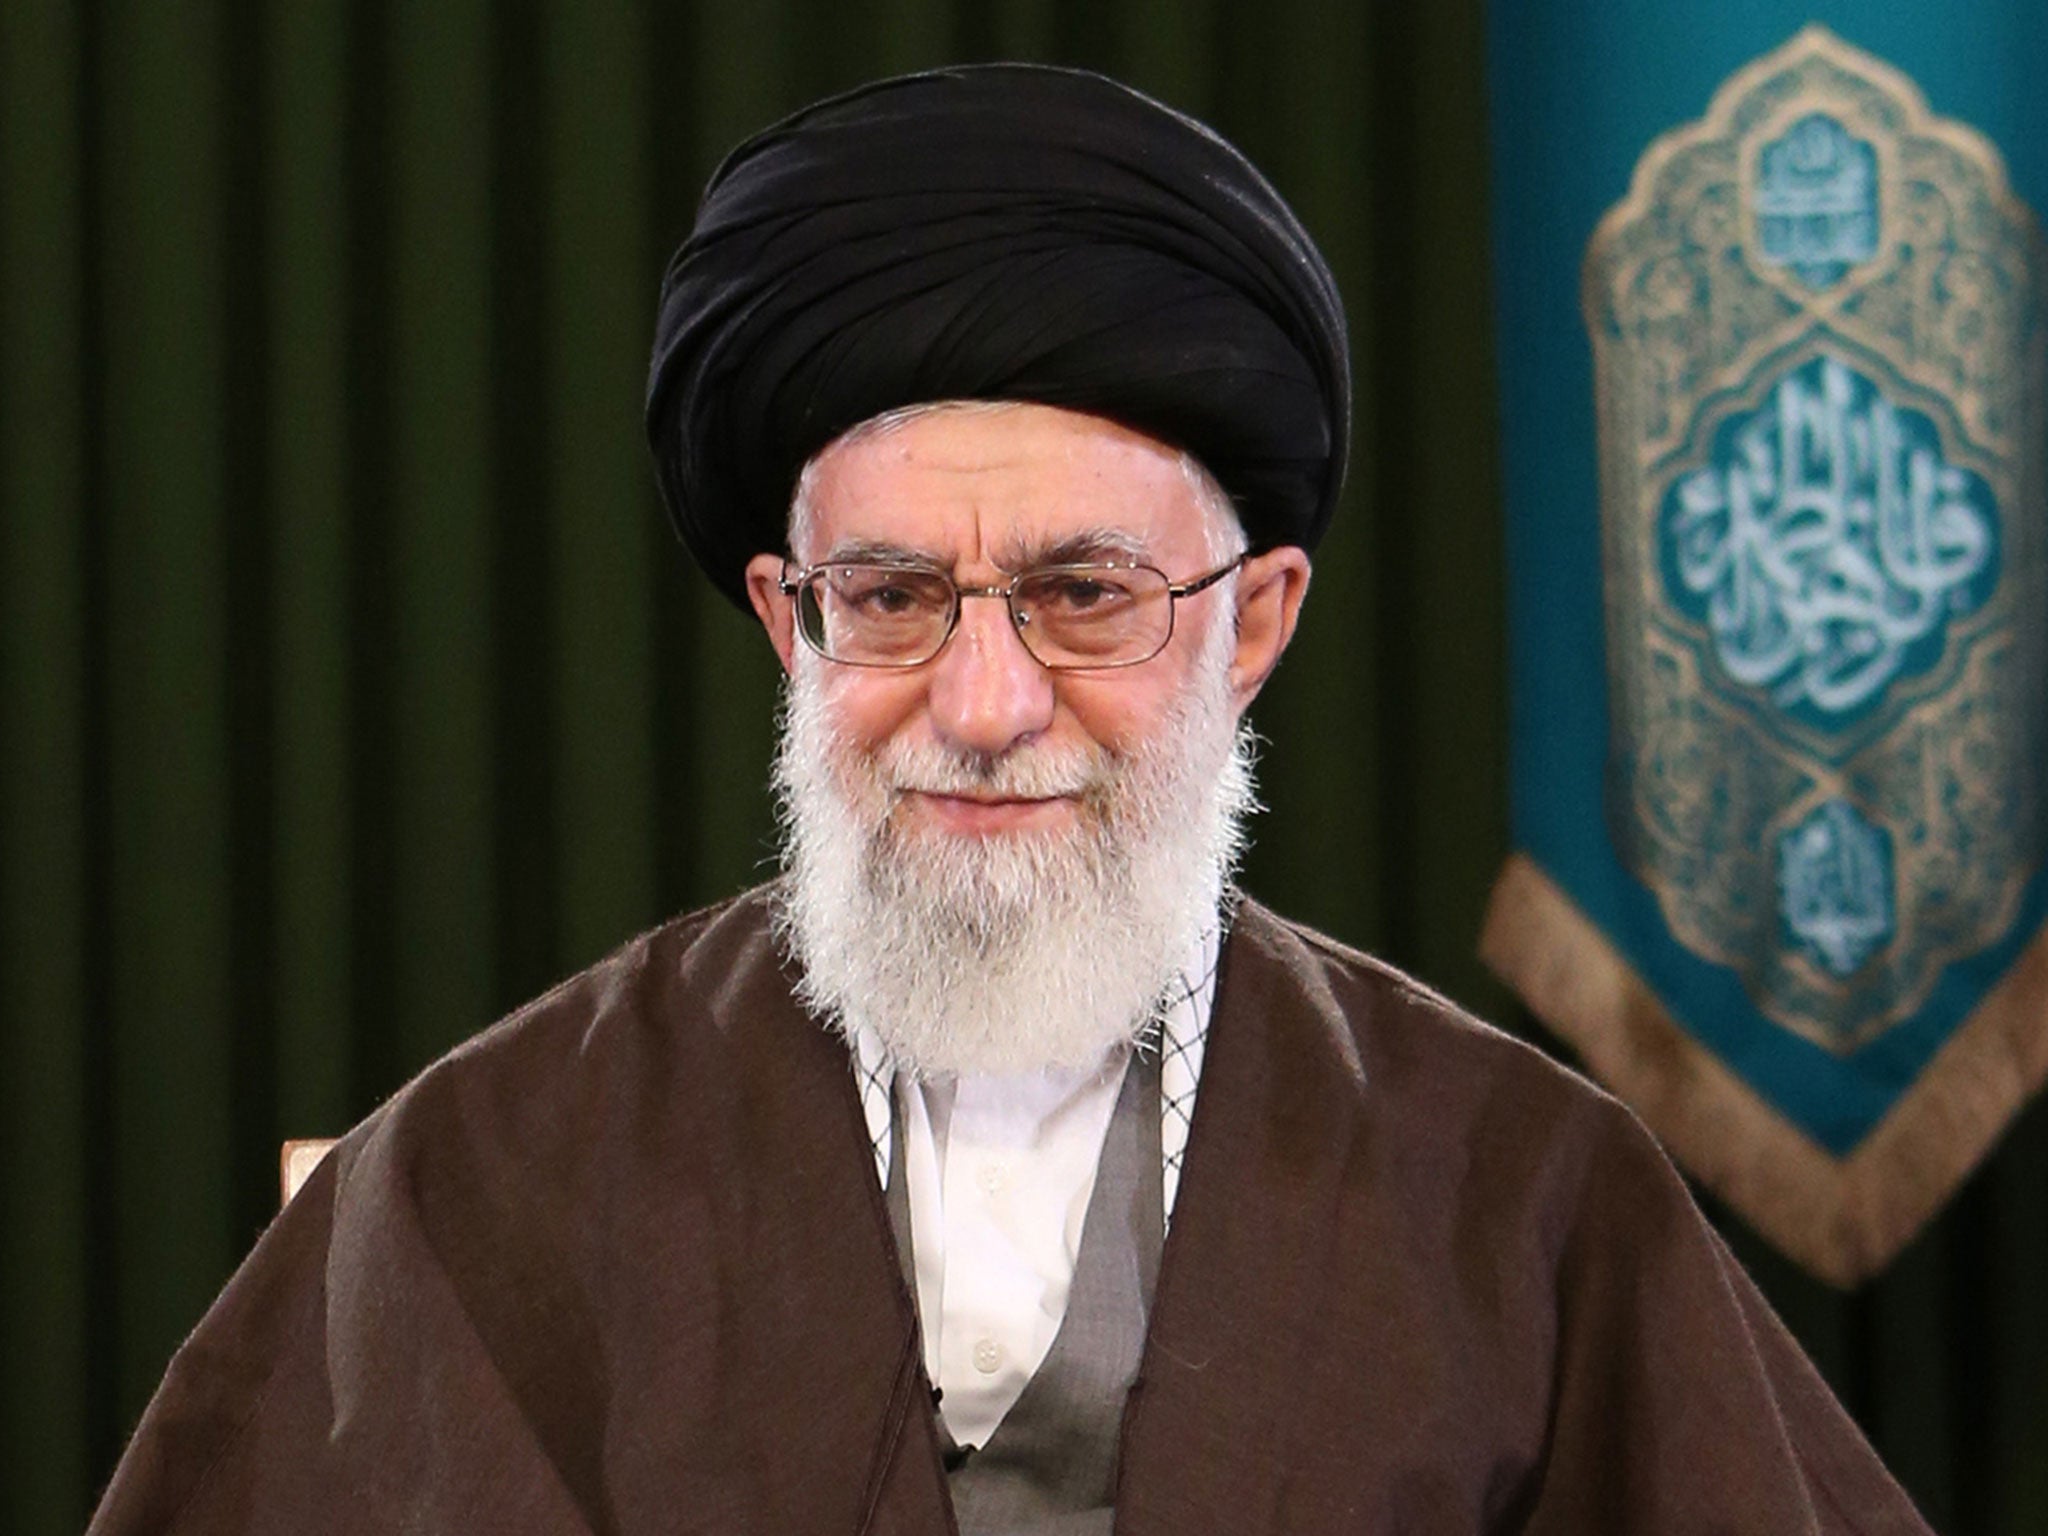 Ayatollah Ali Khamenei addressing the nation on the occasion of Nowruz, the Persian new year, in Tehran on 20 March